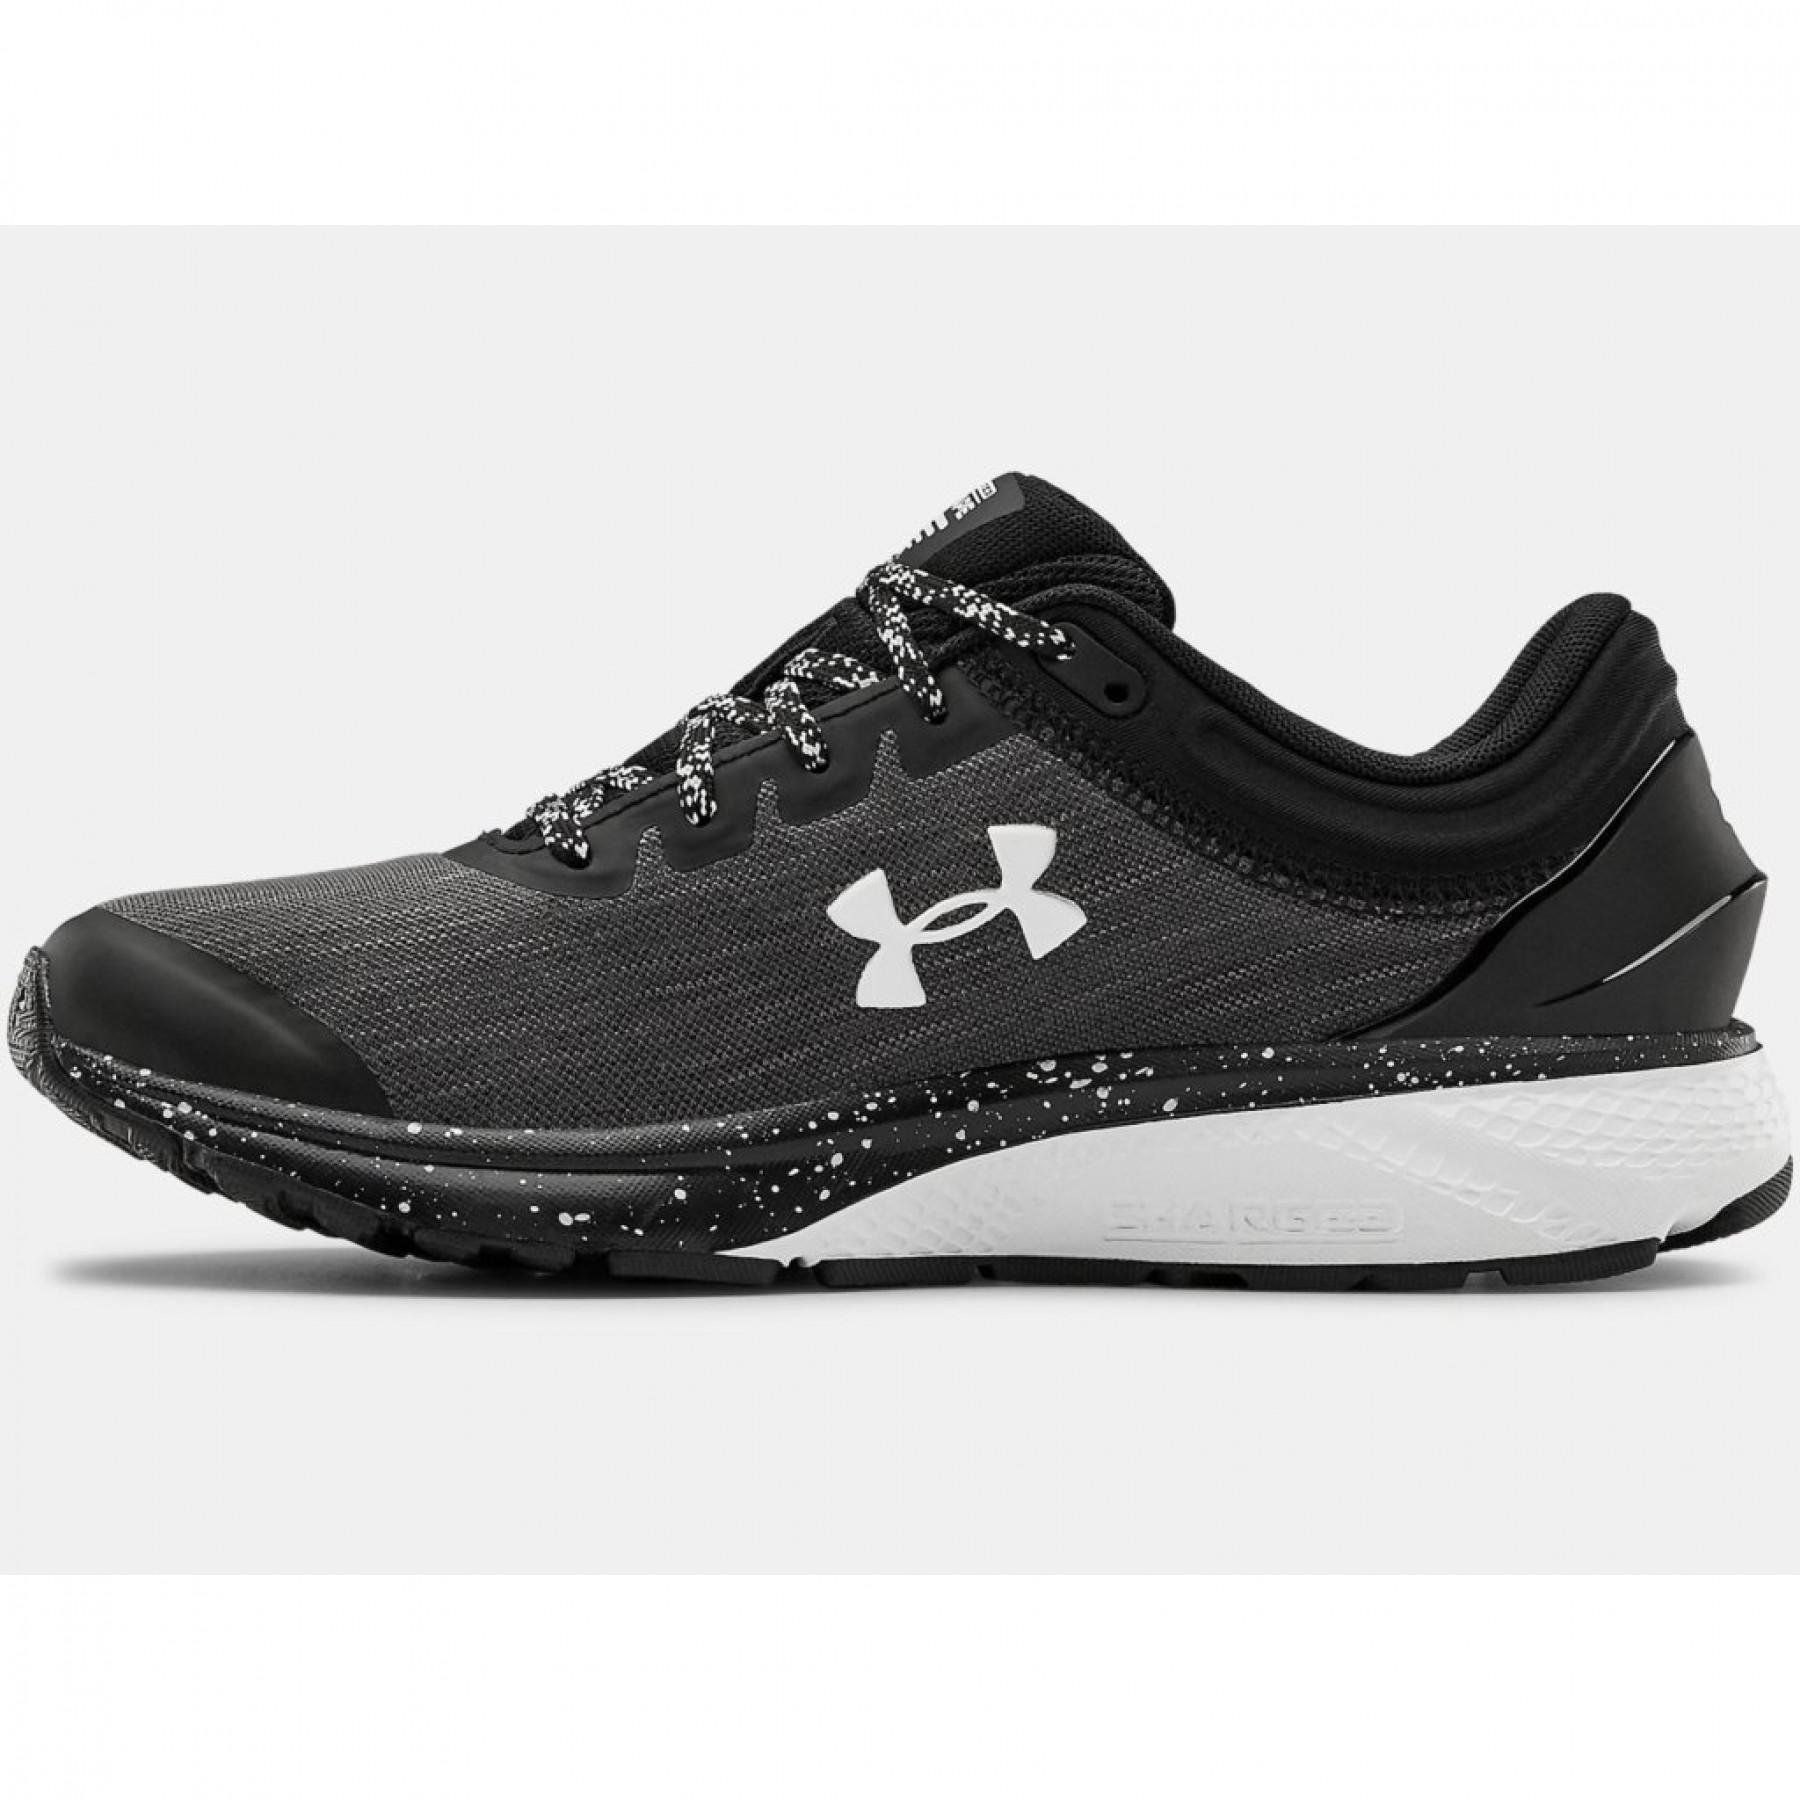 Women's shoes Under Armour Charged Escape 3 Evo